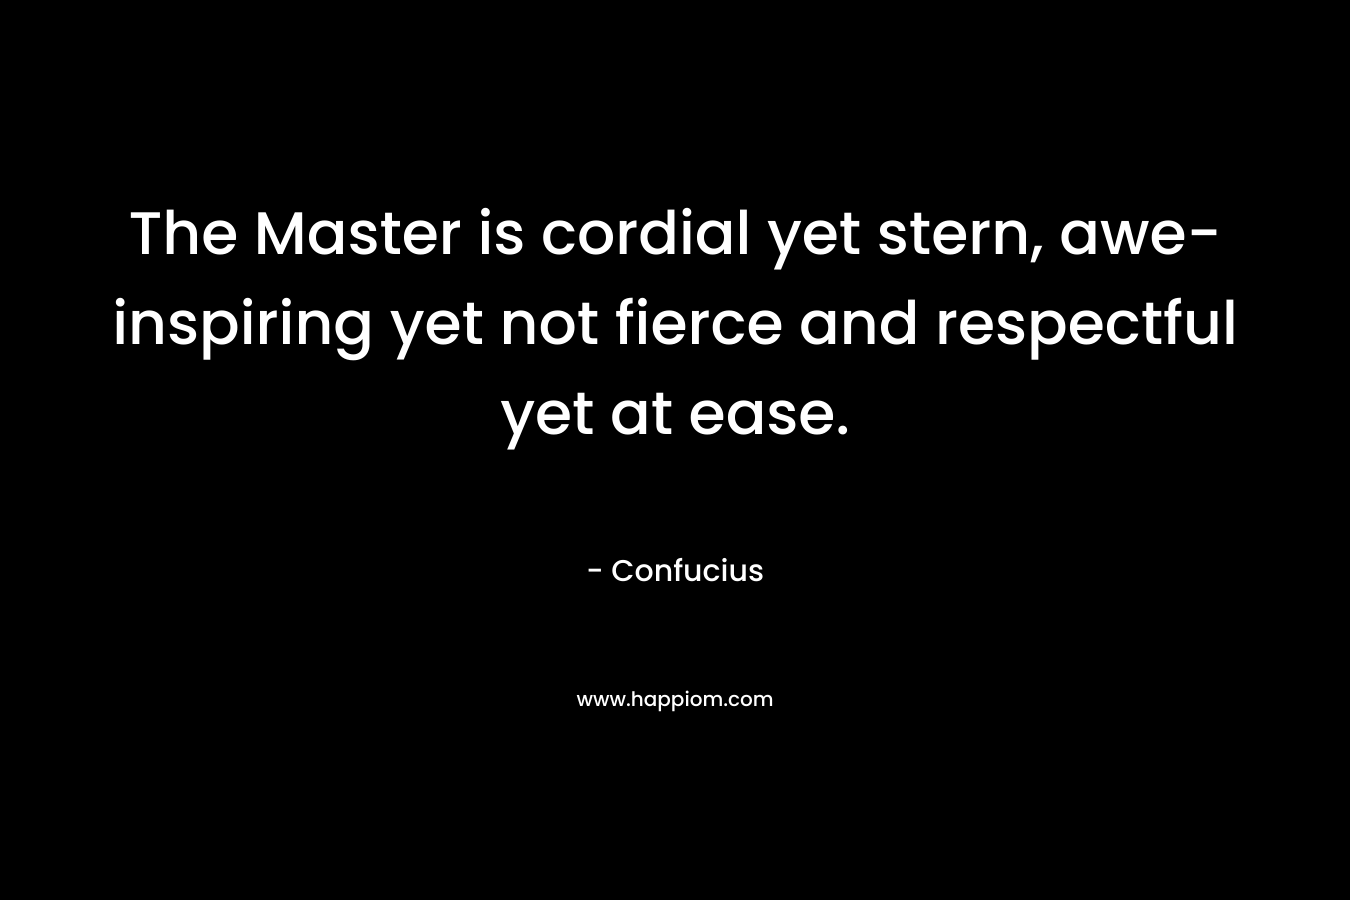 The Master is cordial yet stern, awe-inspiring yet not fierce and respectful yet at ease. – Confucius